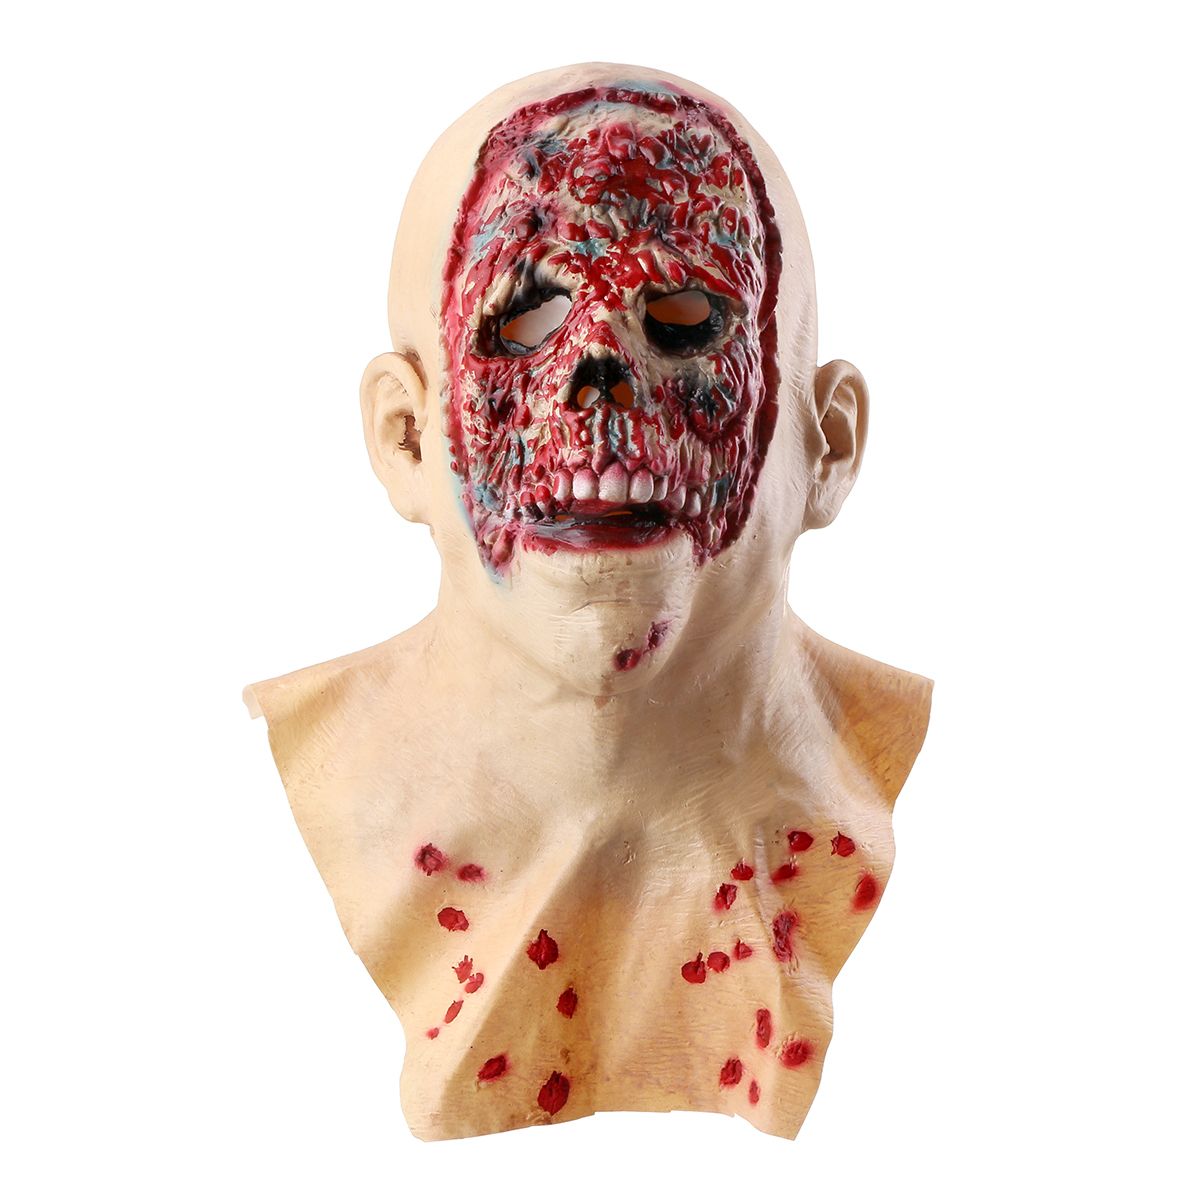 Halloween-Zombie-Mask-Latex-Face-Melting-Walking-Dead-Bloody-Scary-Head-Costume-1564073